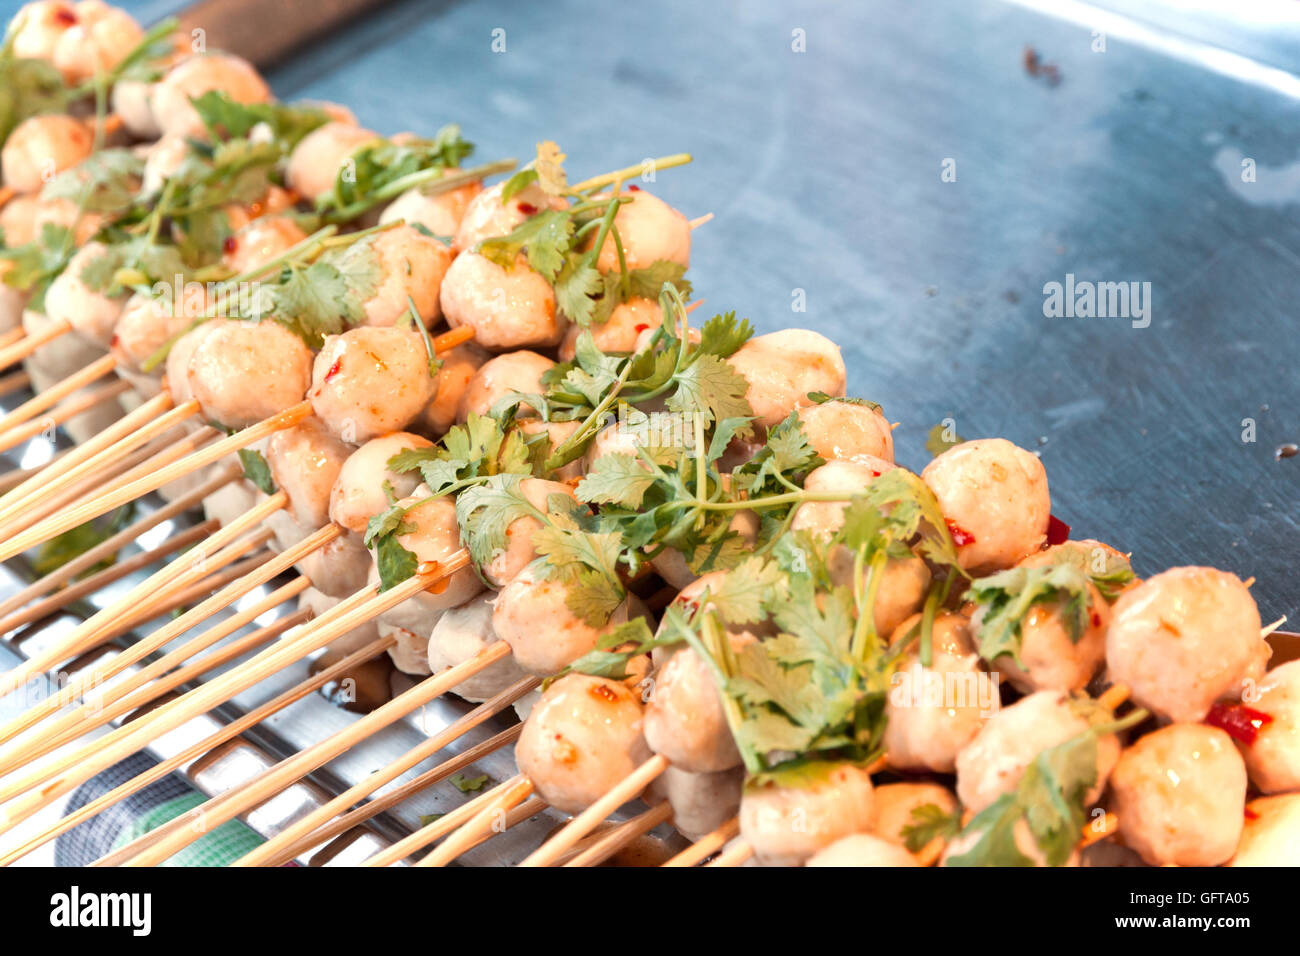 pork meat ball grill. Thai snack on stainless tray sale at food street Stock Photo